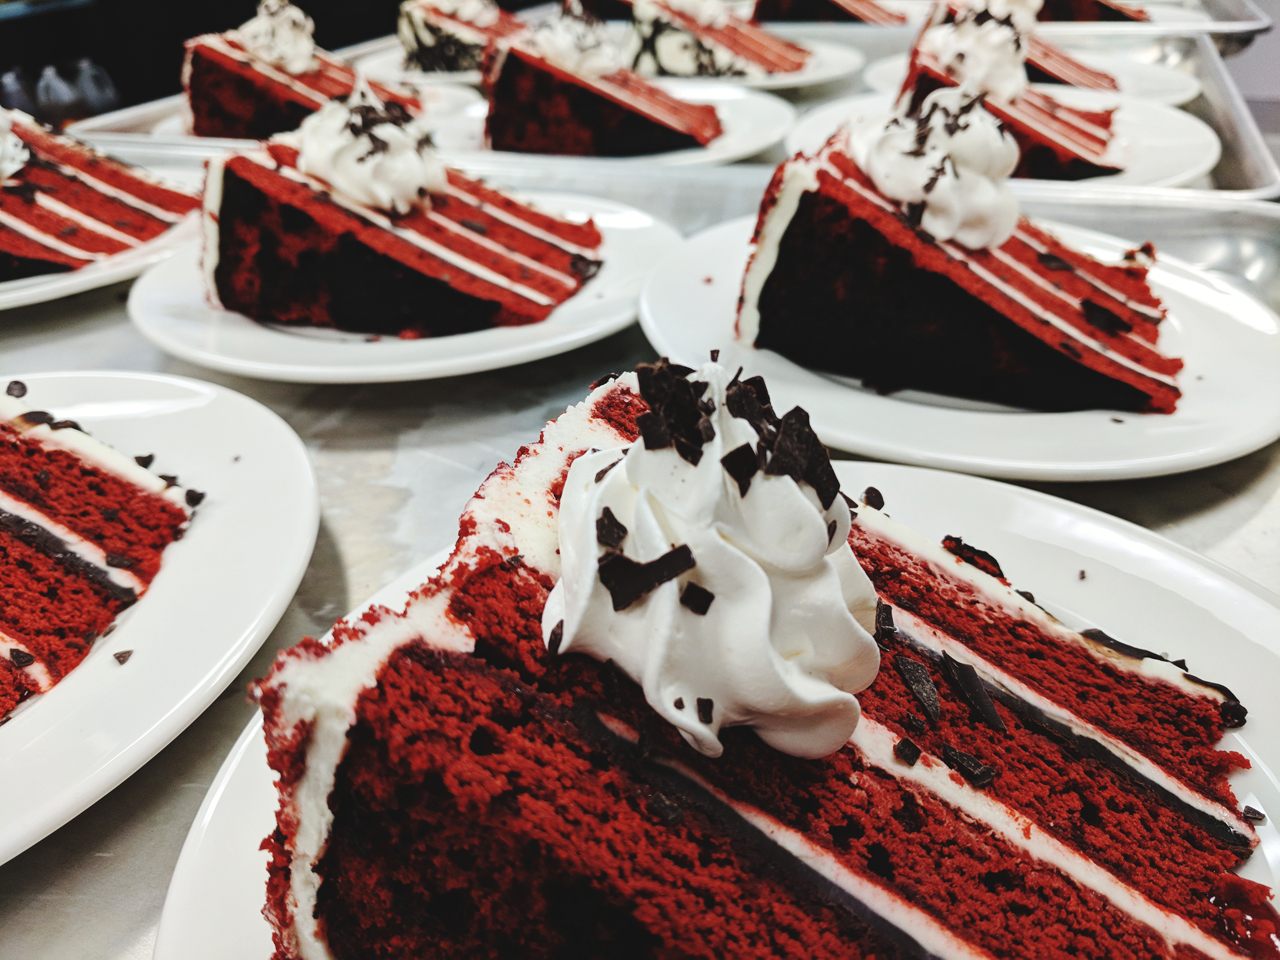 Red velvet cake adds to the repertoire of red desserts made for Juneteenth festivities.  